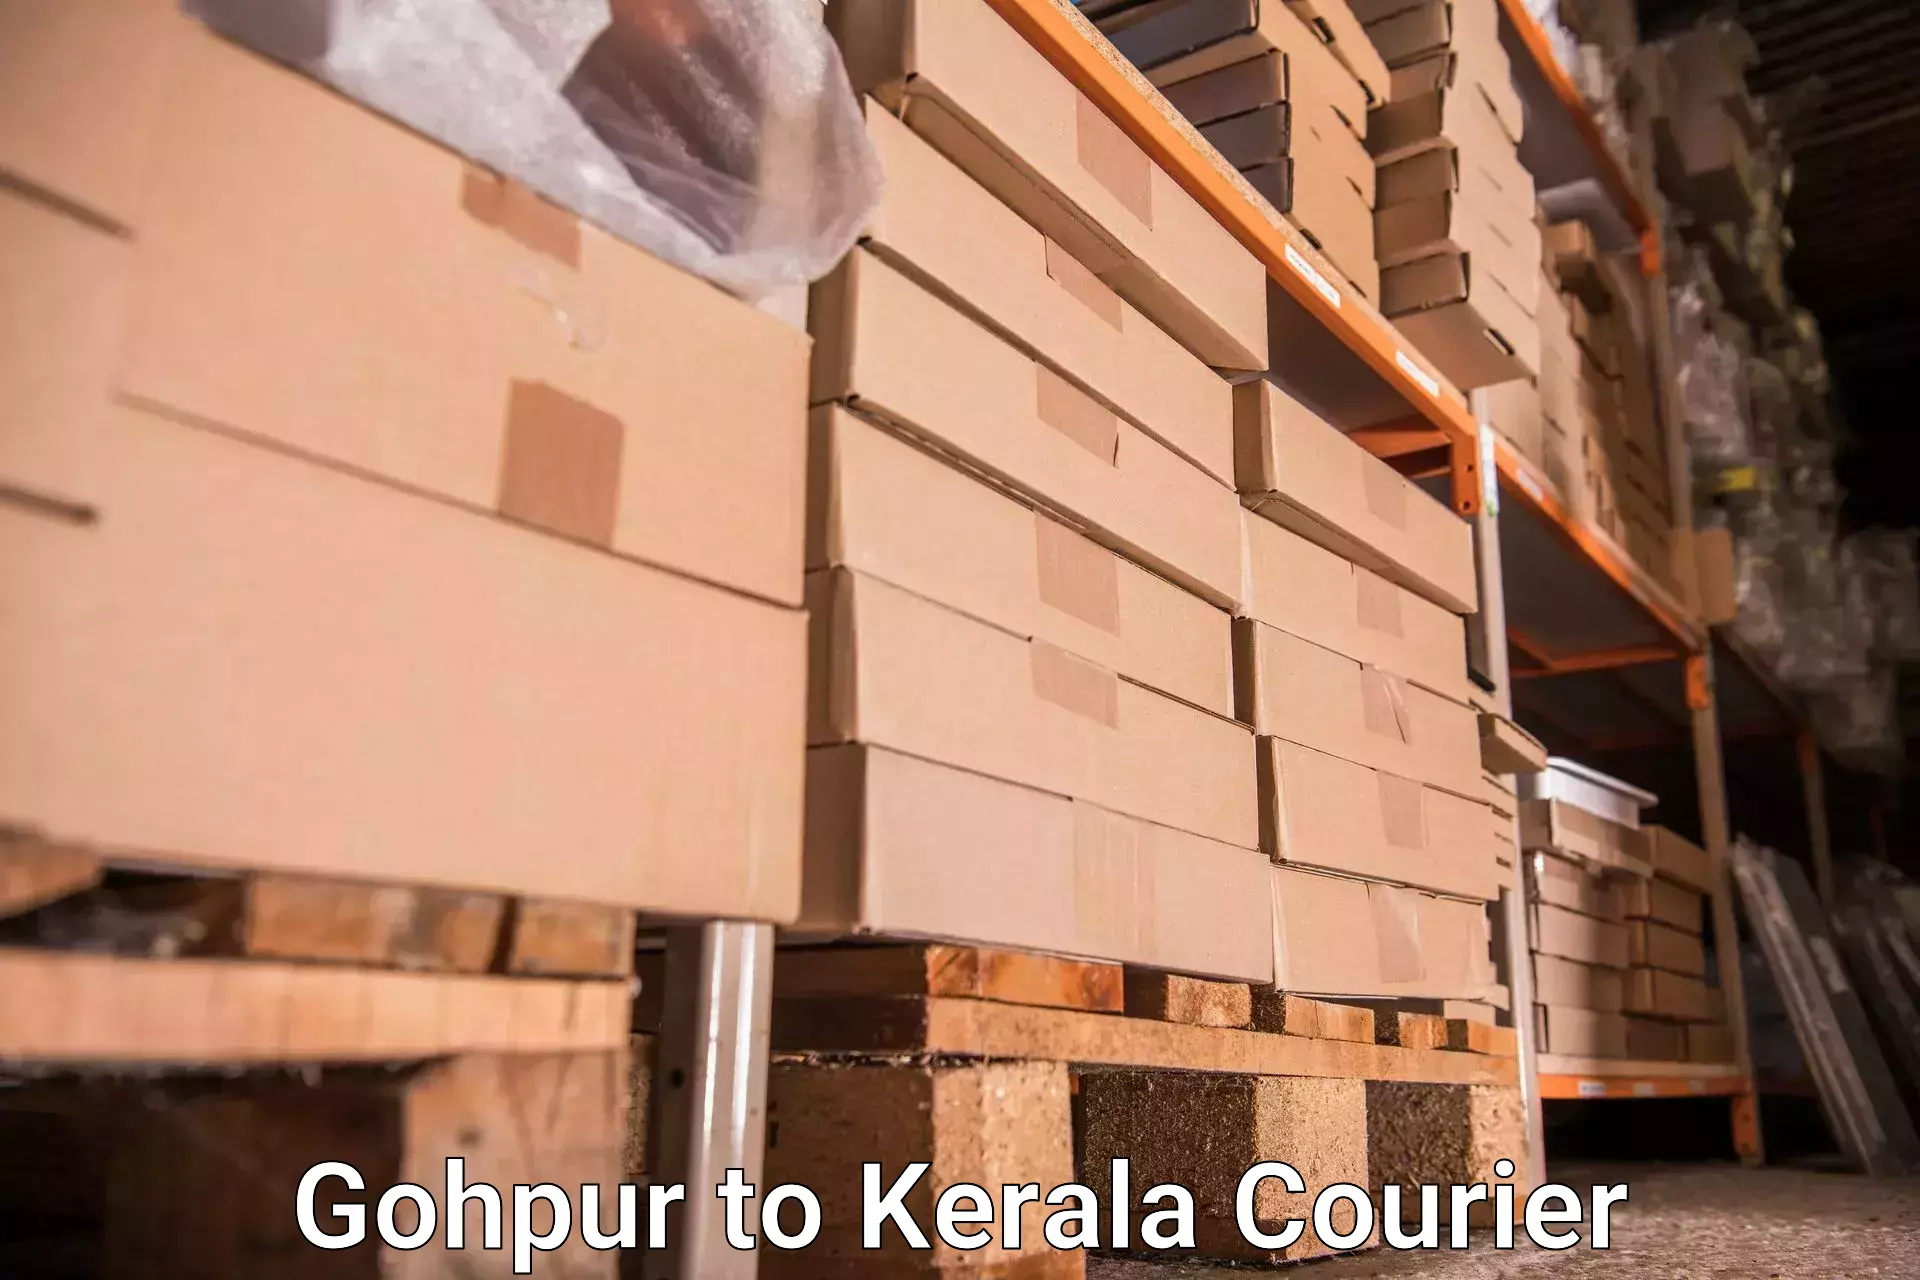 Personal effects shipping in Gohpur to Thalassery